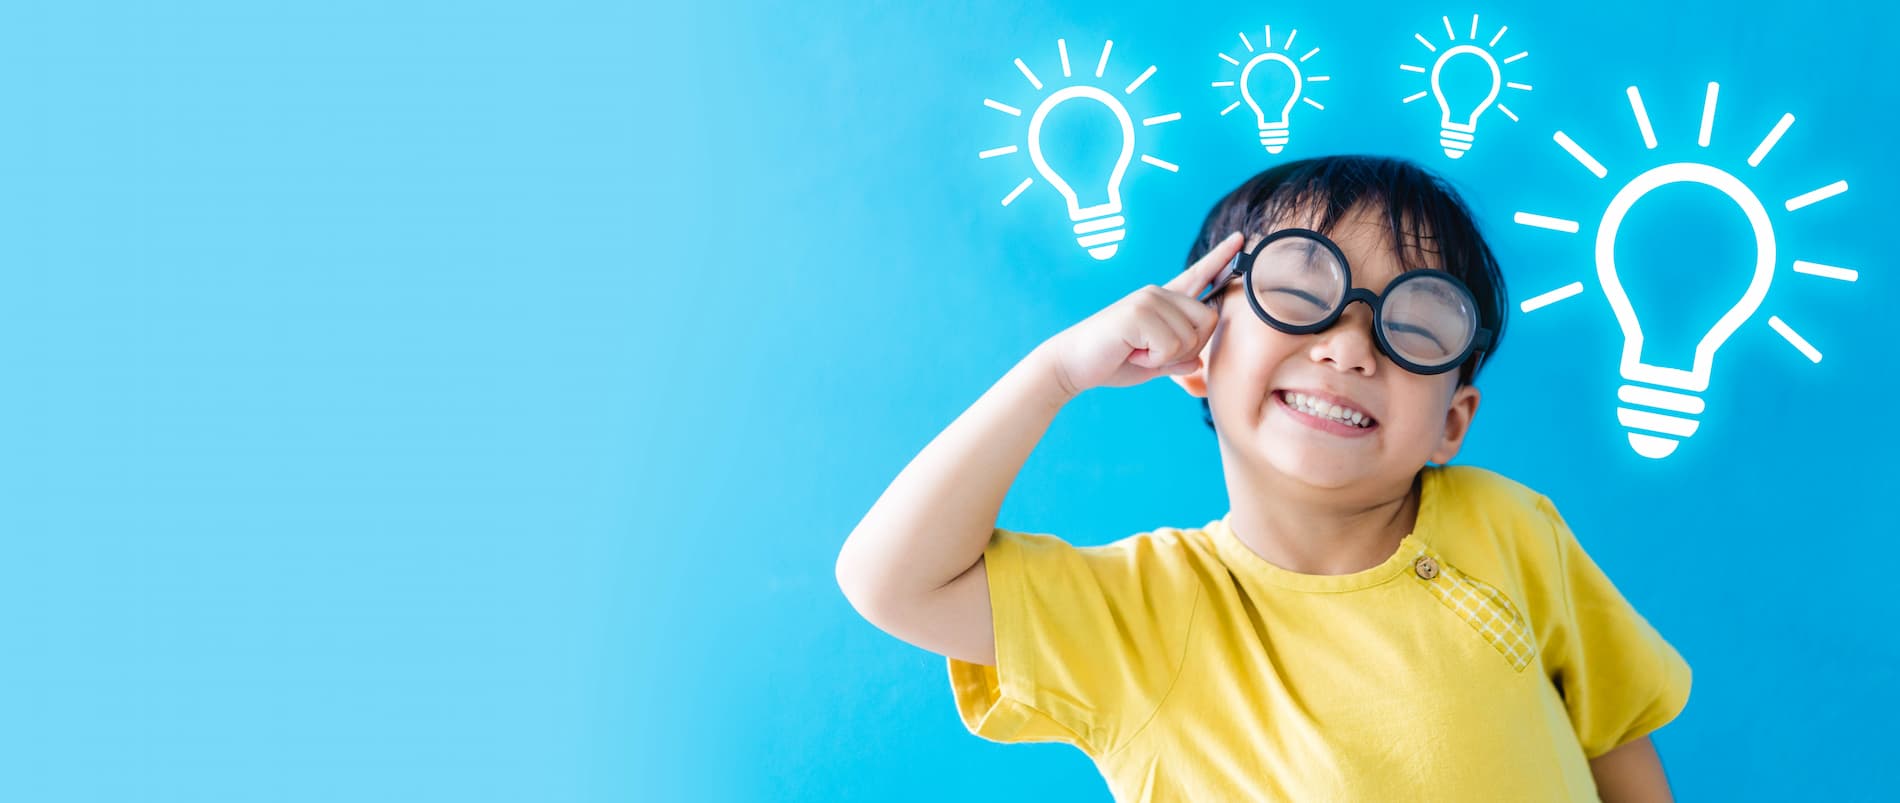 Header image for the Oxis International School - Smiling boy in spectacles